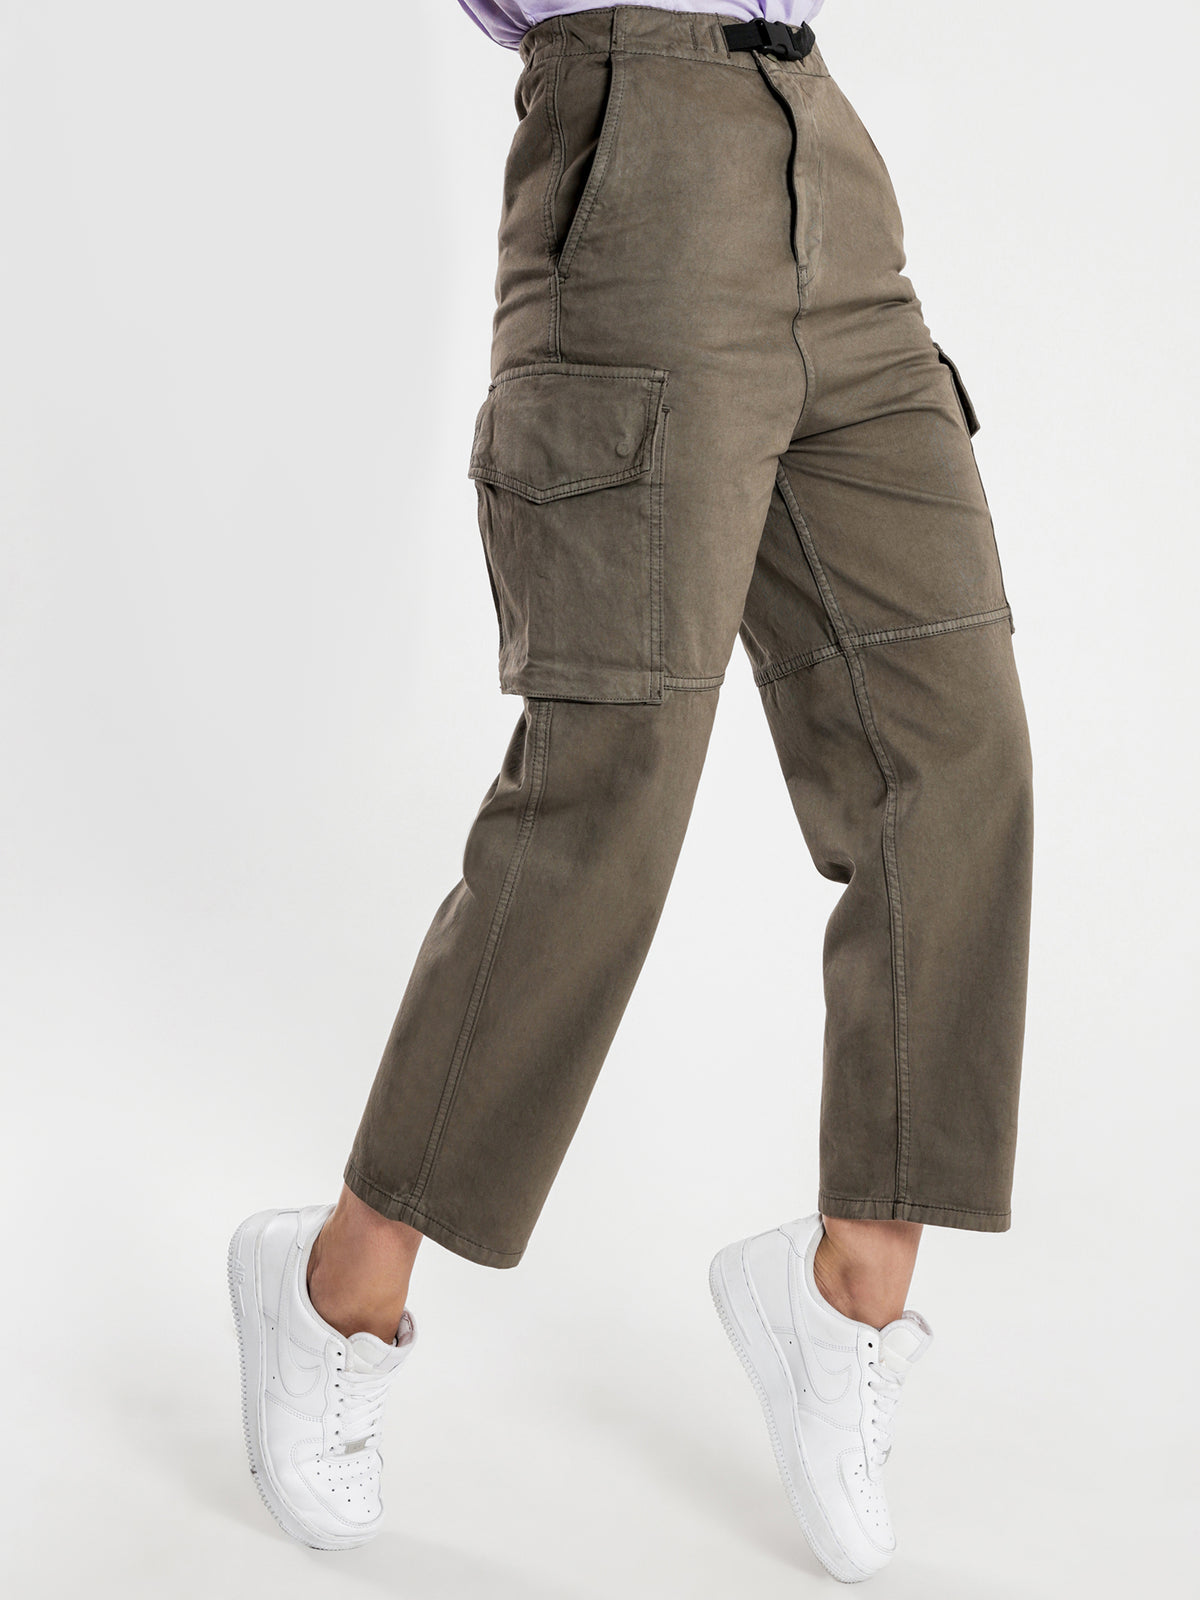 Luton Relaxed Pants in Khaki